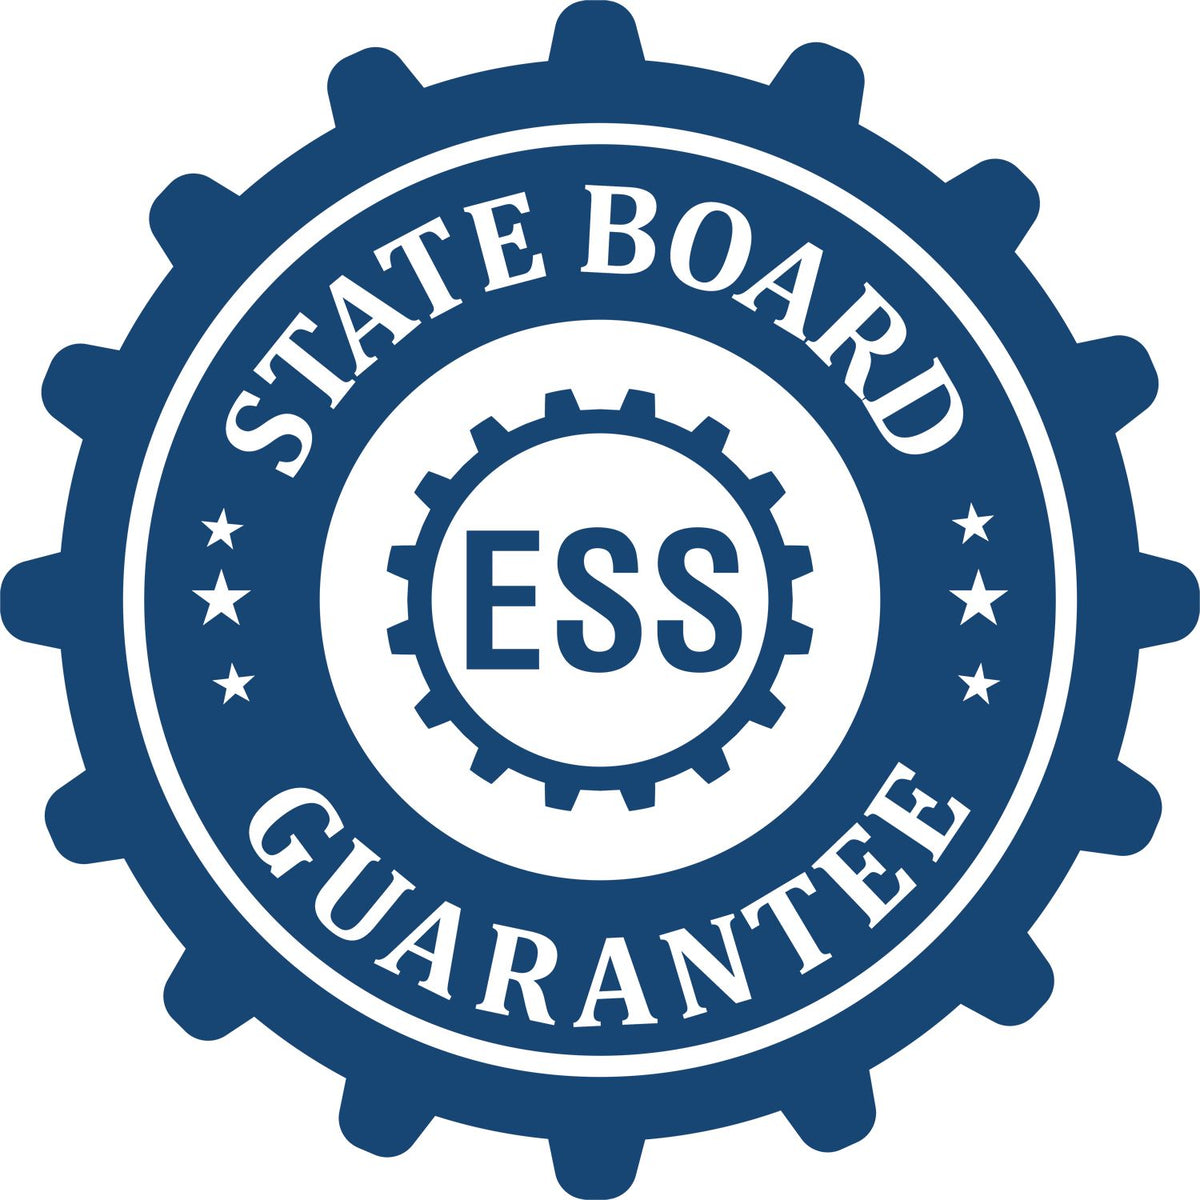 An emblem in a gear shape illustrating a state board guarantee for the Digital California PE Stamp and Electronic Seal for California Engineer product.